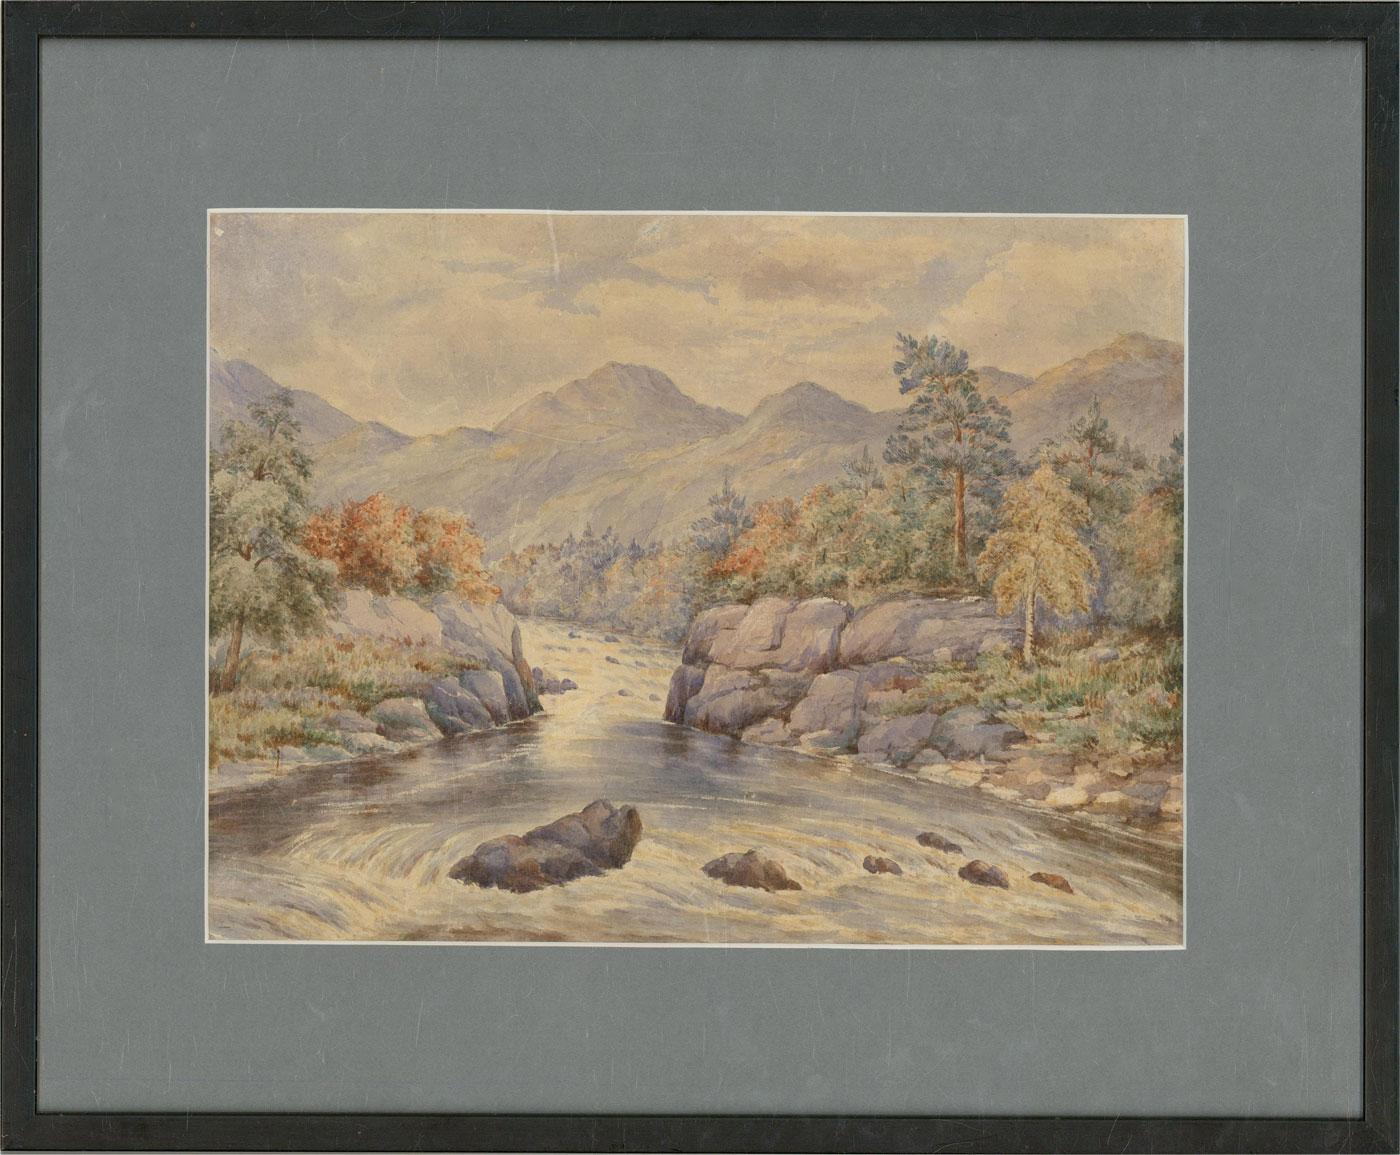 A fine and delicate watercolour painting with sgraffito details, depicting a river scene with mountains in the distance. Unsigned. Well-presented in a grey card mount and in a simple black frame. On watercolour paper.
